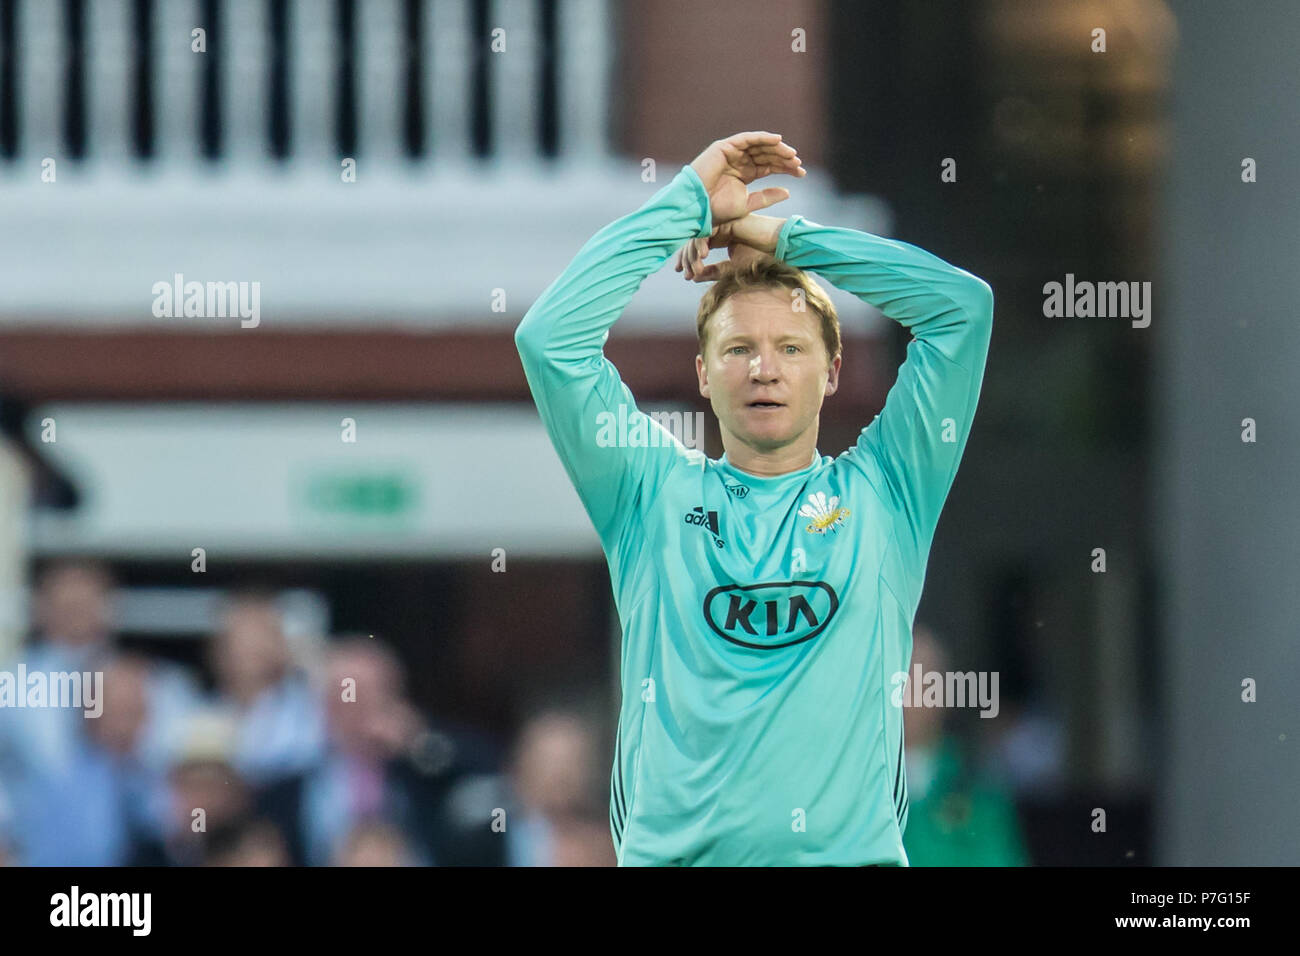 London, UK. 5 July, 2018. Gareth Batty bowling for Surrey against Middlesex in the Vitality Blast T20 cricket match at Lords. David Rowe/Alamy Live News Stock Photo